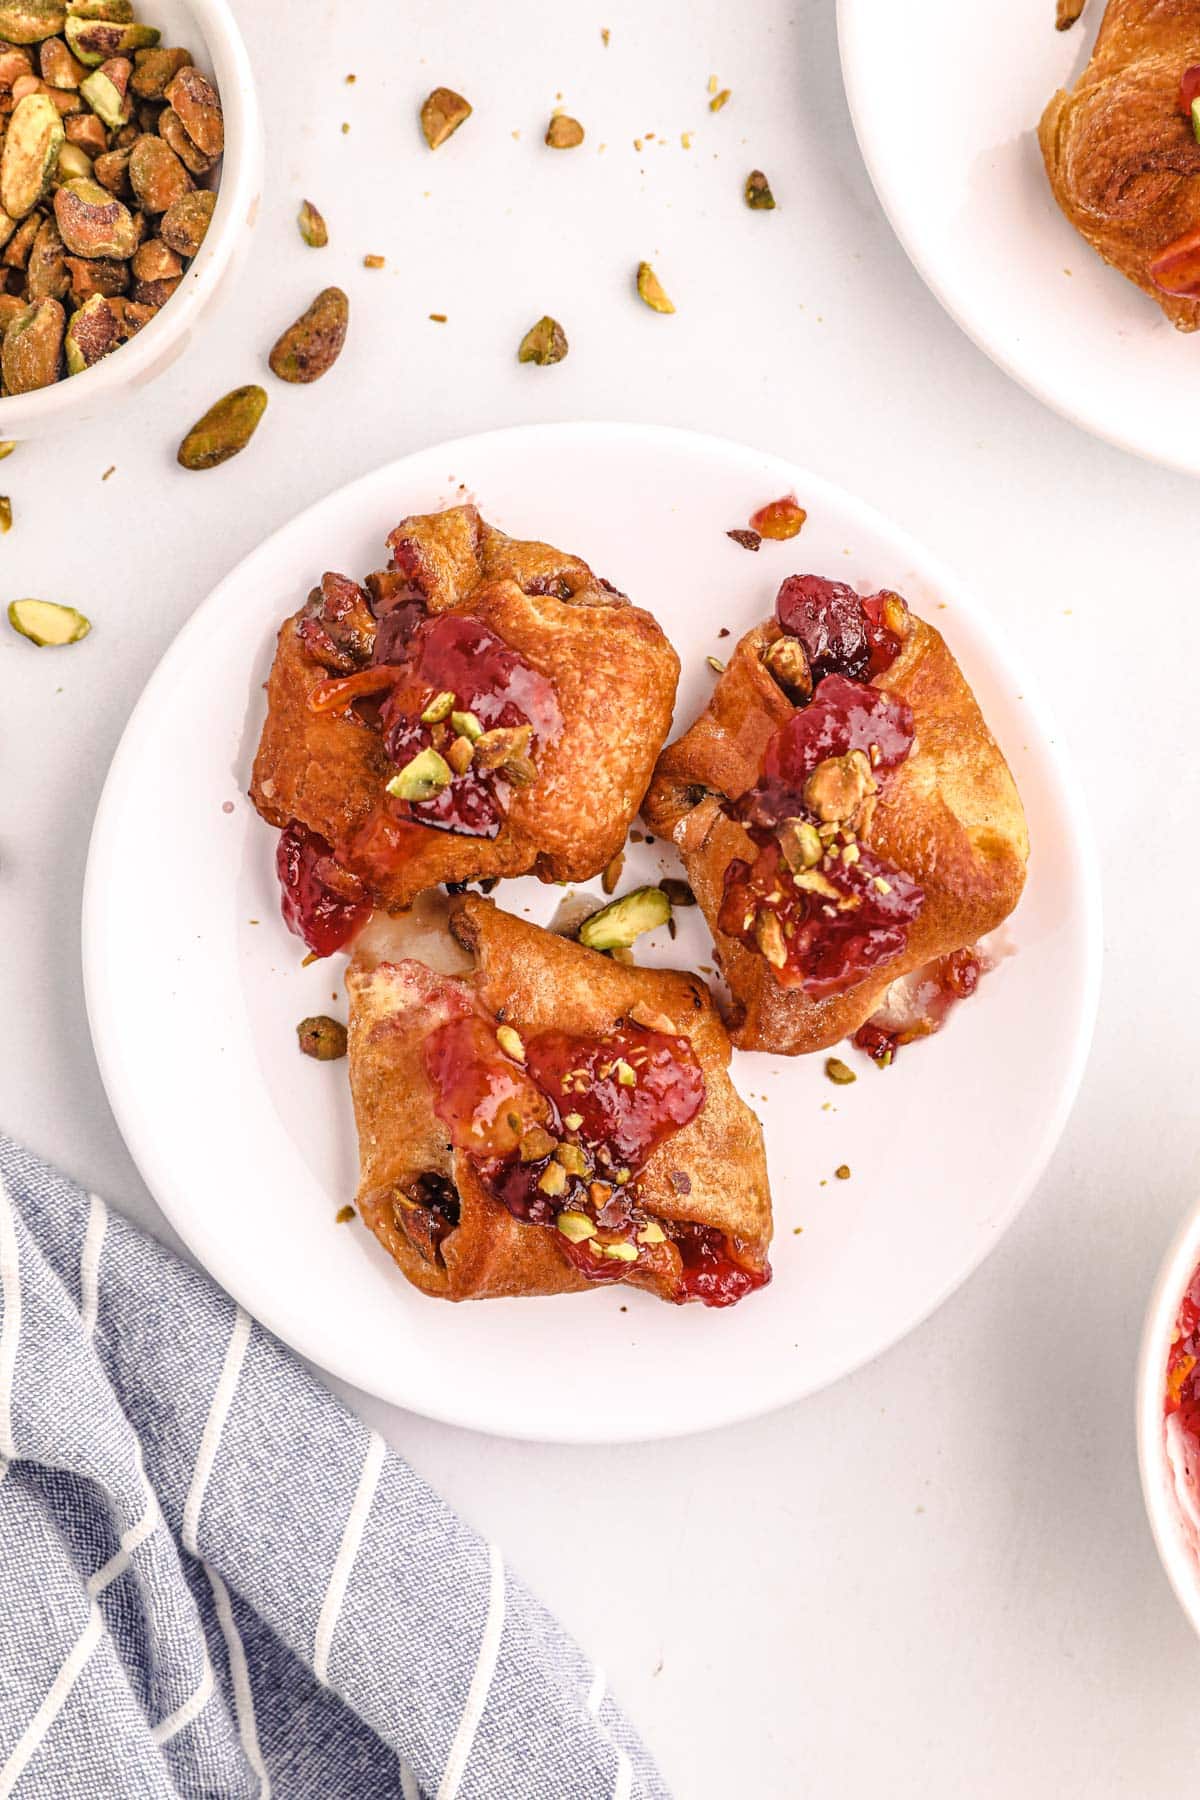 brie bites topped with pistachio nuts and cranberry sauce